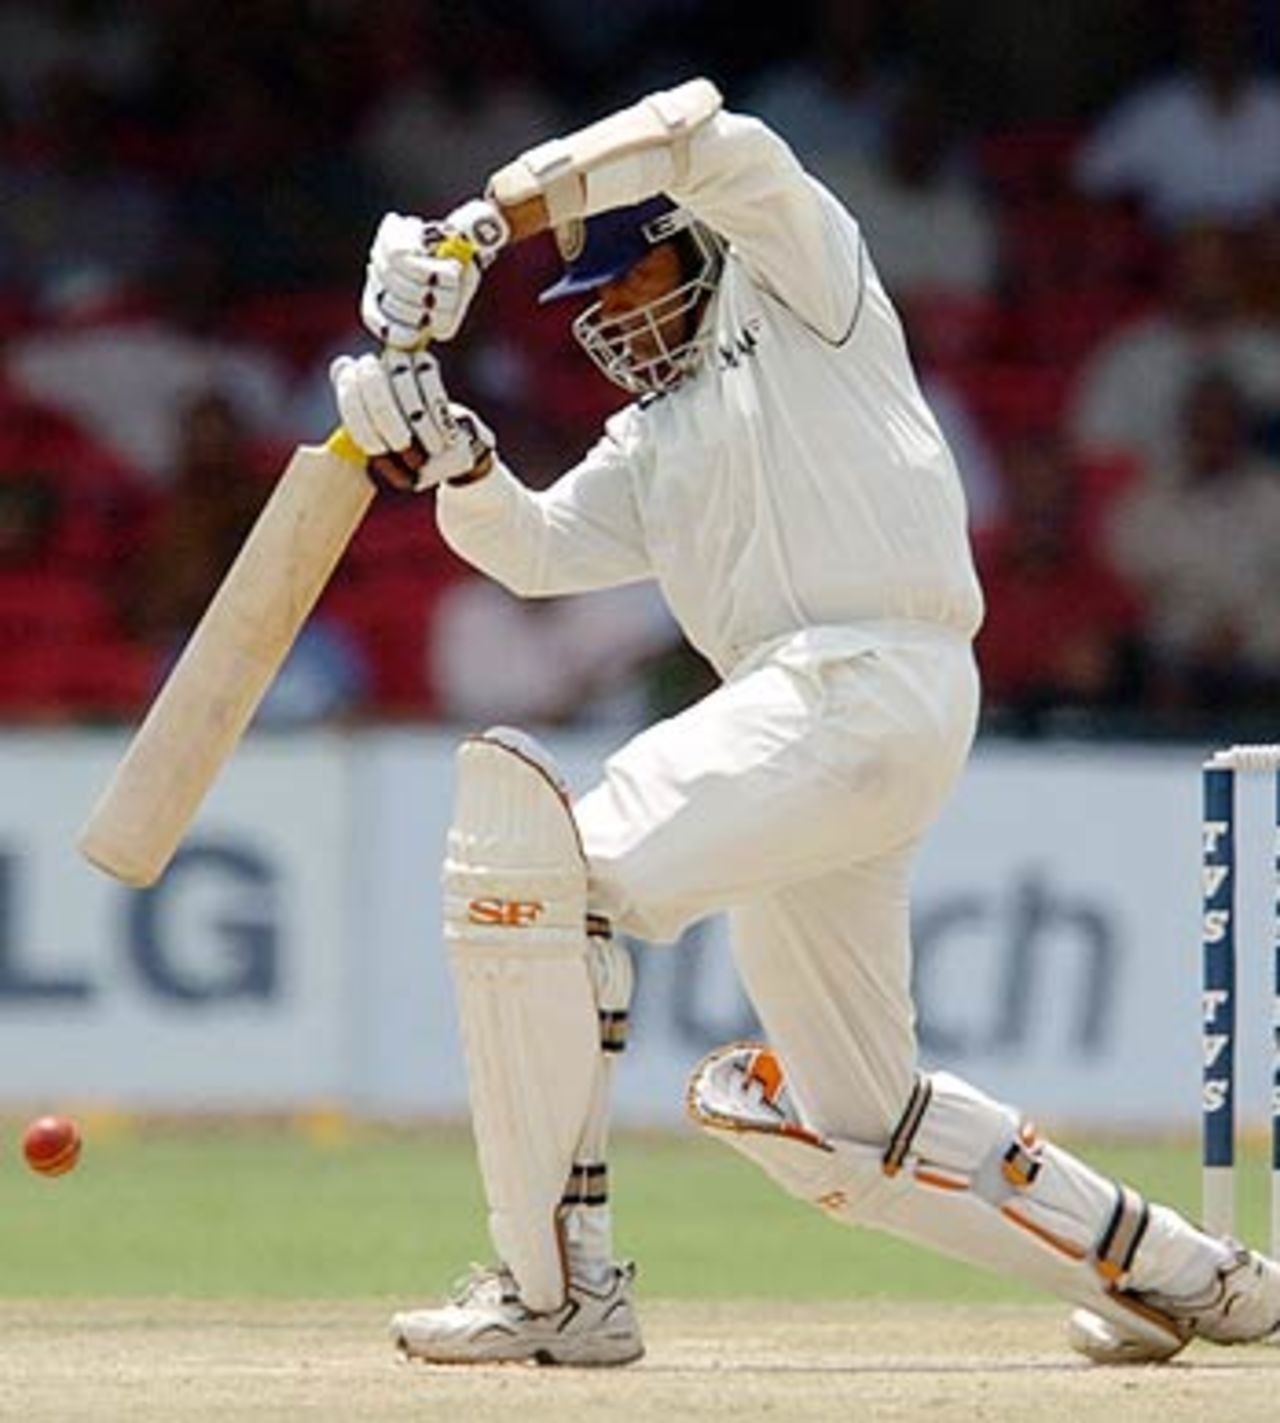 The Indian tail wagged as Anil Kumble scored 22 in a 53-run partnership with VVS Laxman, India v Pakistan, 3rd Test, Bangalore, 4th day, March 27, 2005